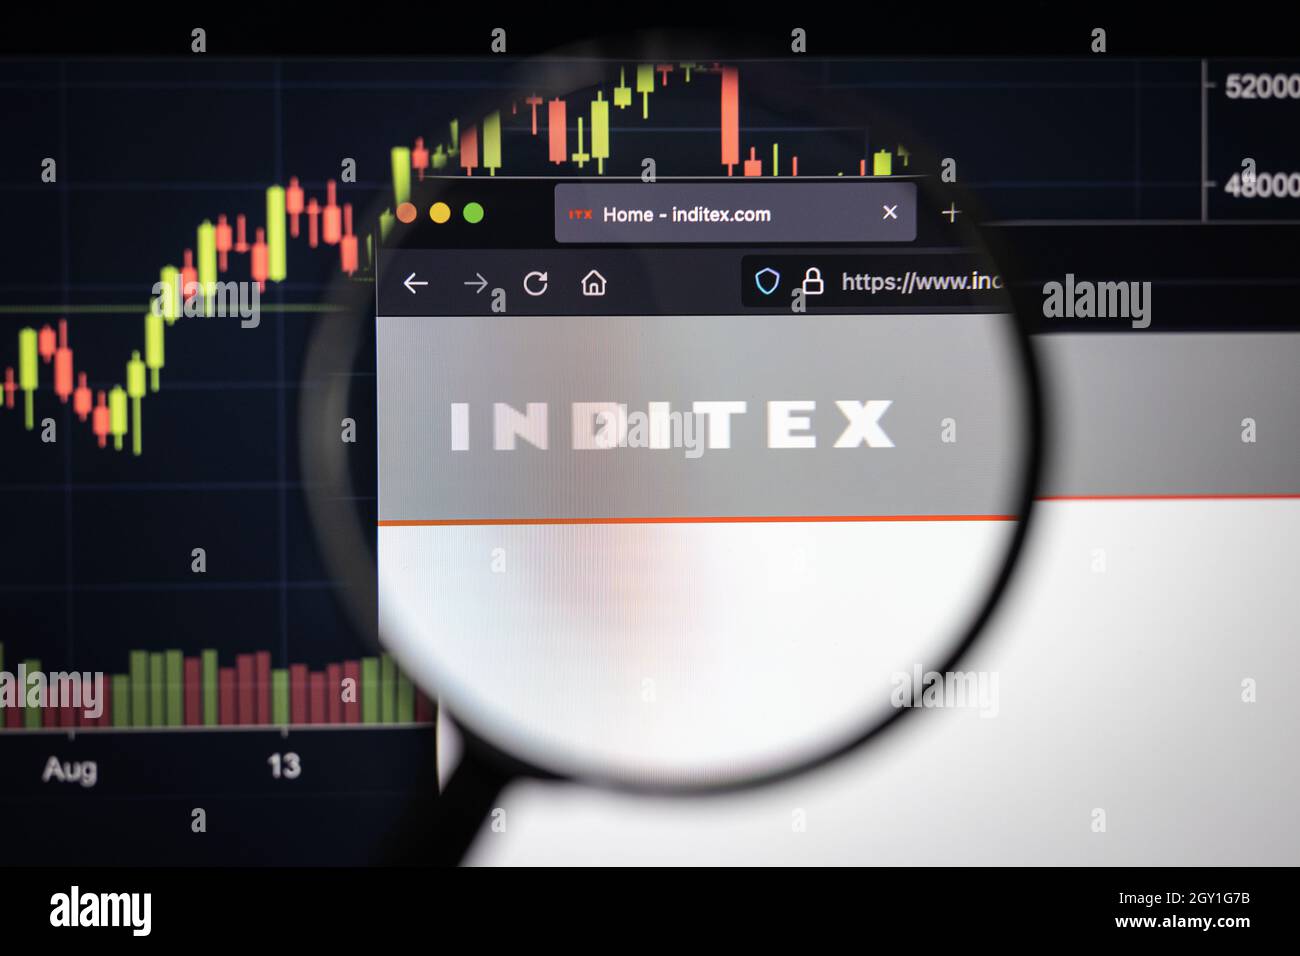 Inditex company logo on a website with blurry stock market developments in the background, seen on a computer screen through a magnifying glass Stock Photo